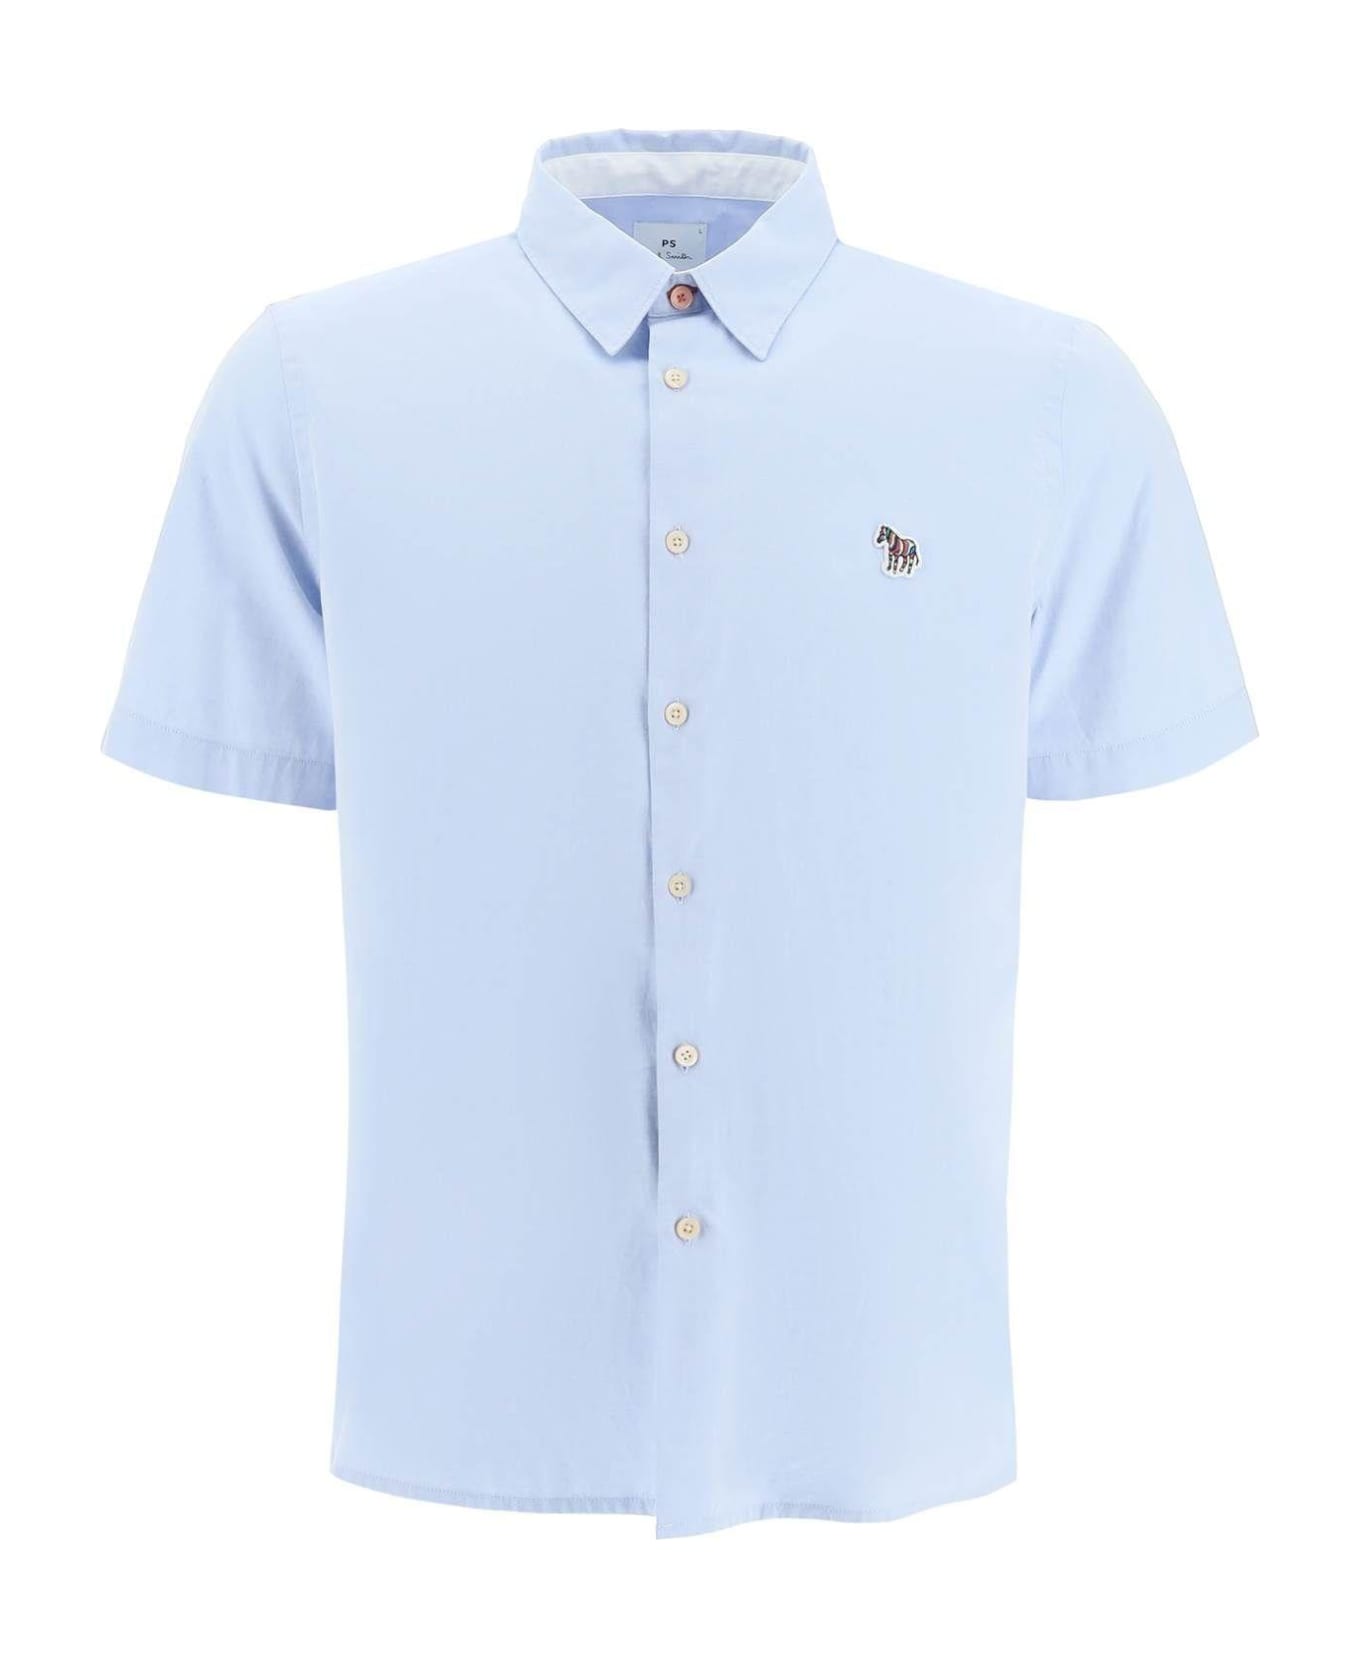 PS by Paul Smith Short Sleeve Shirt In Organic Cotton - Clear Blue